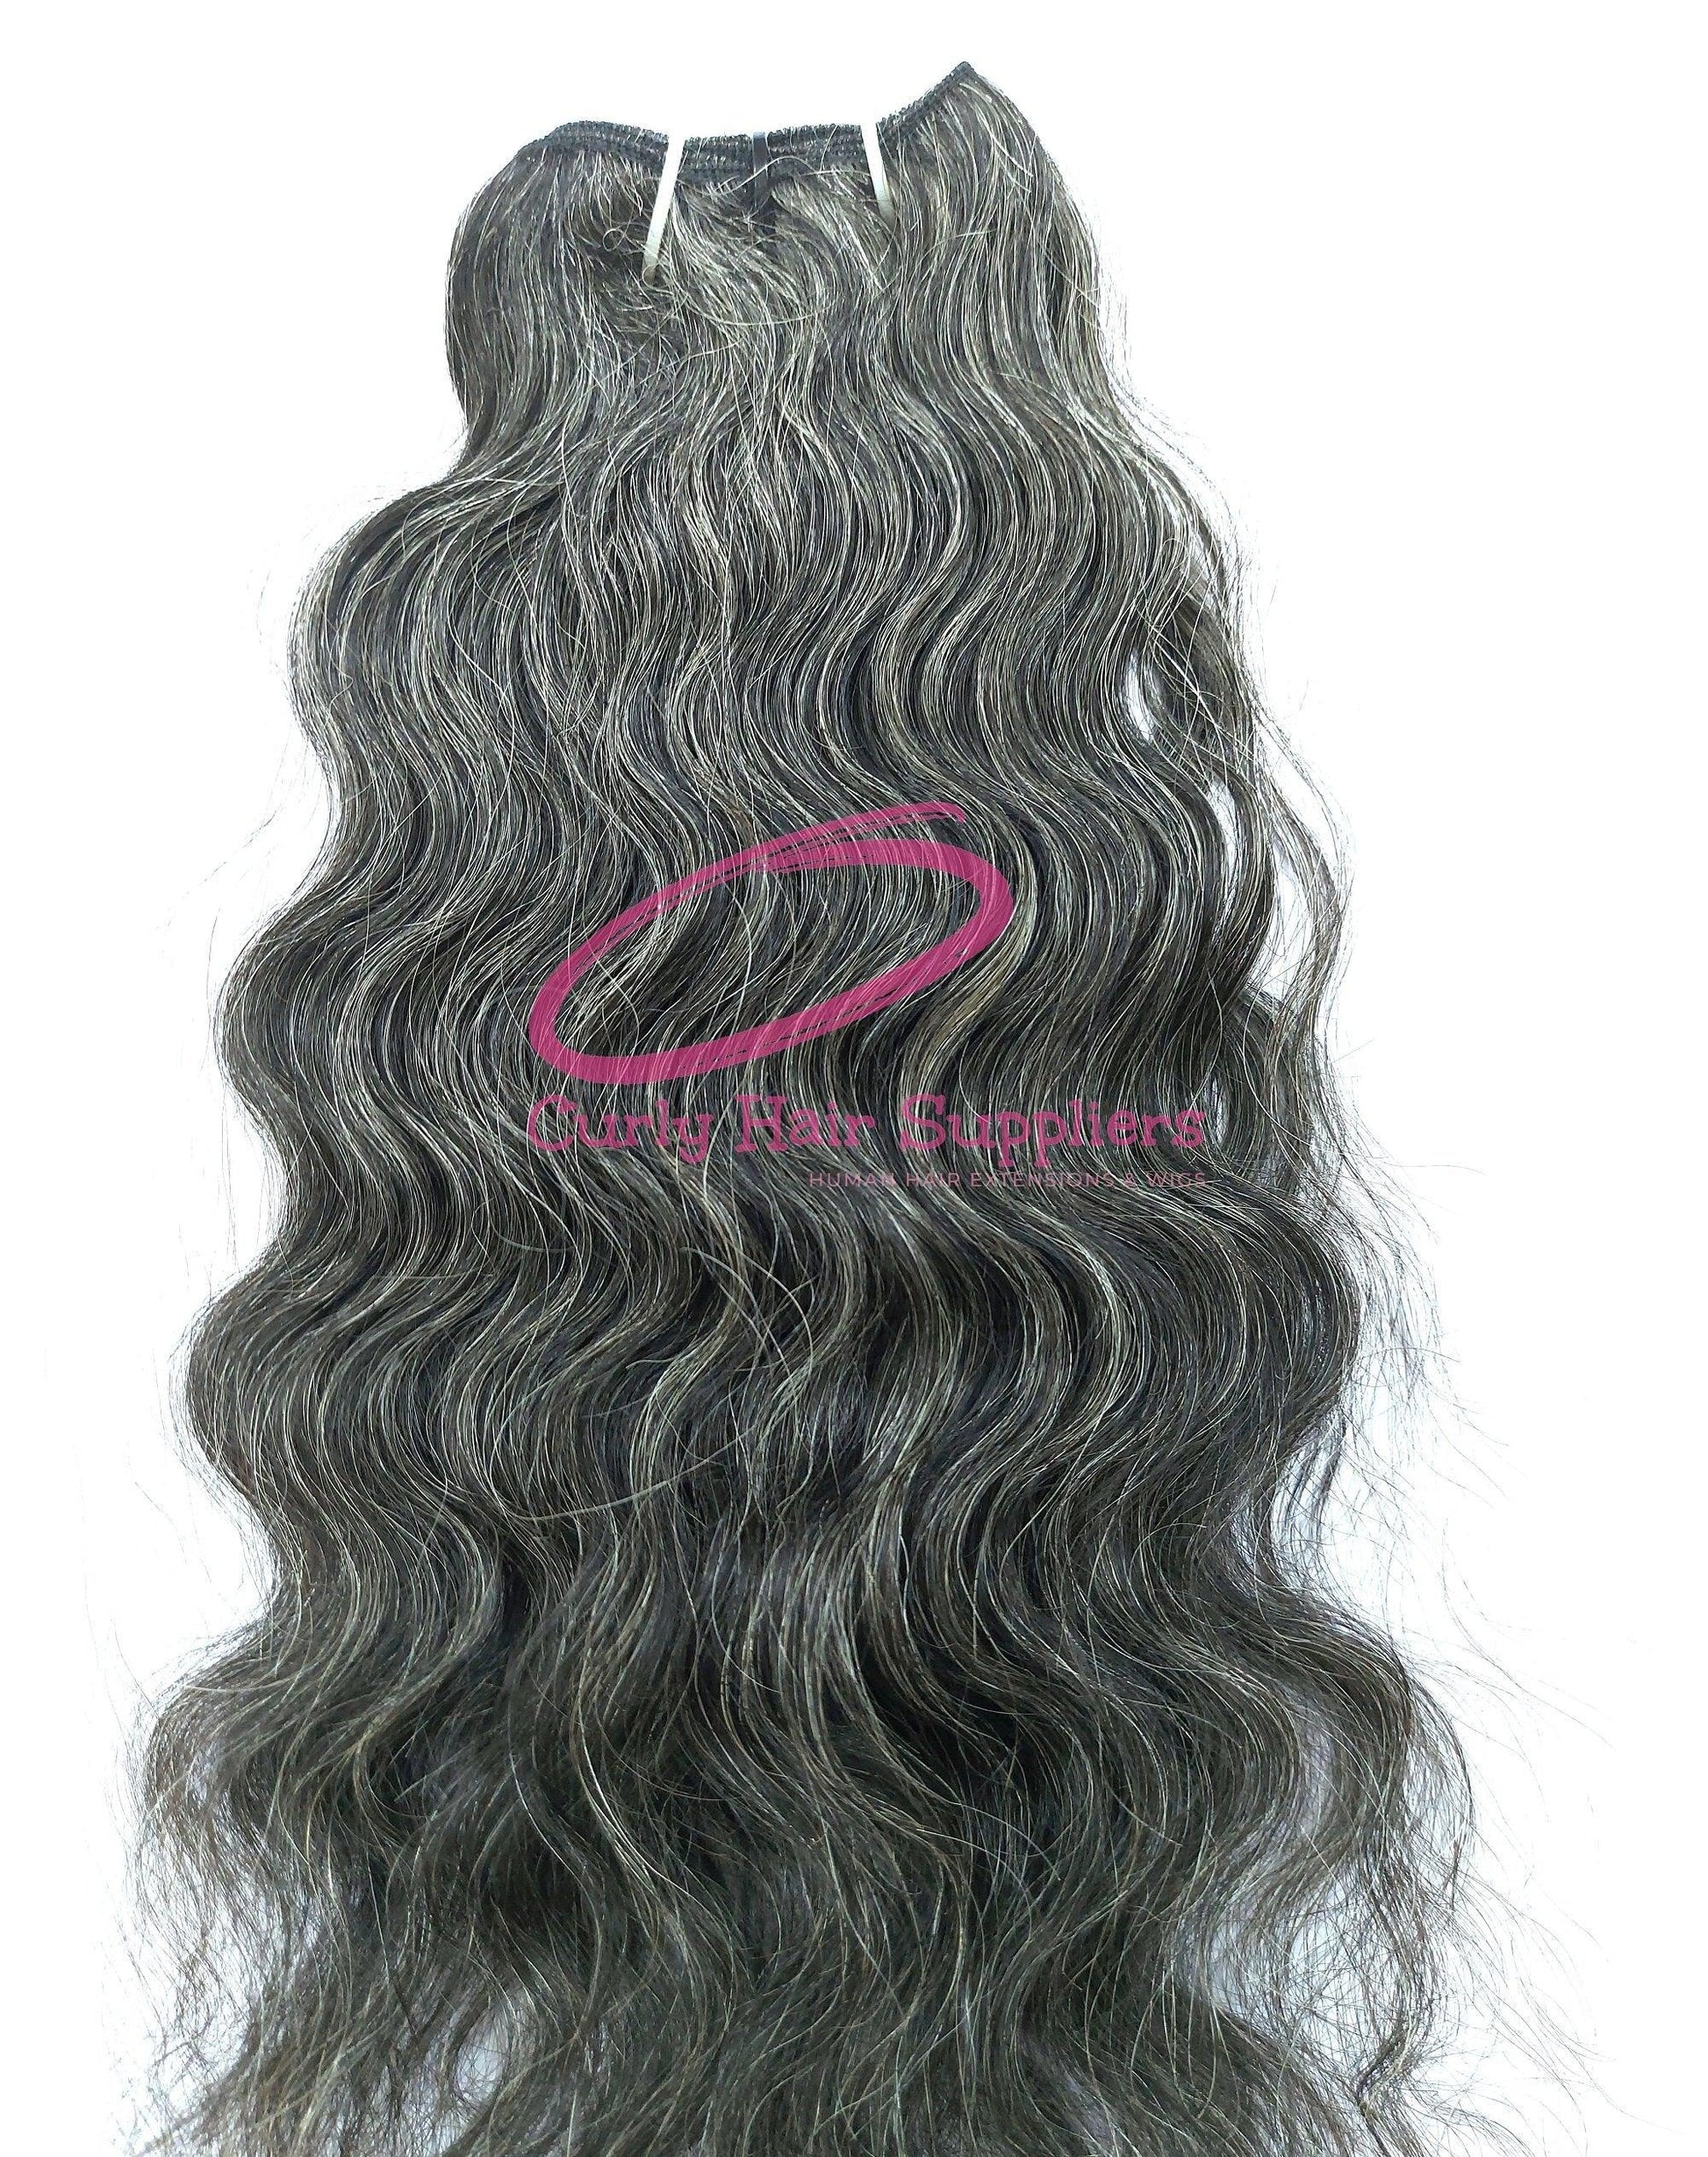 Natural virgin grey curly human hair extensions in India Curly Hair Suppliers